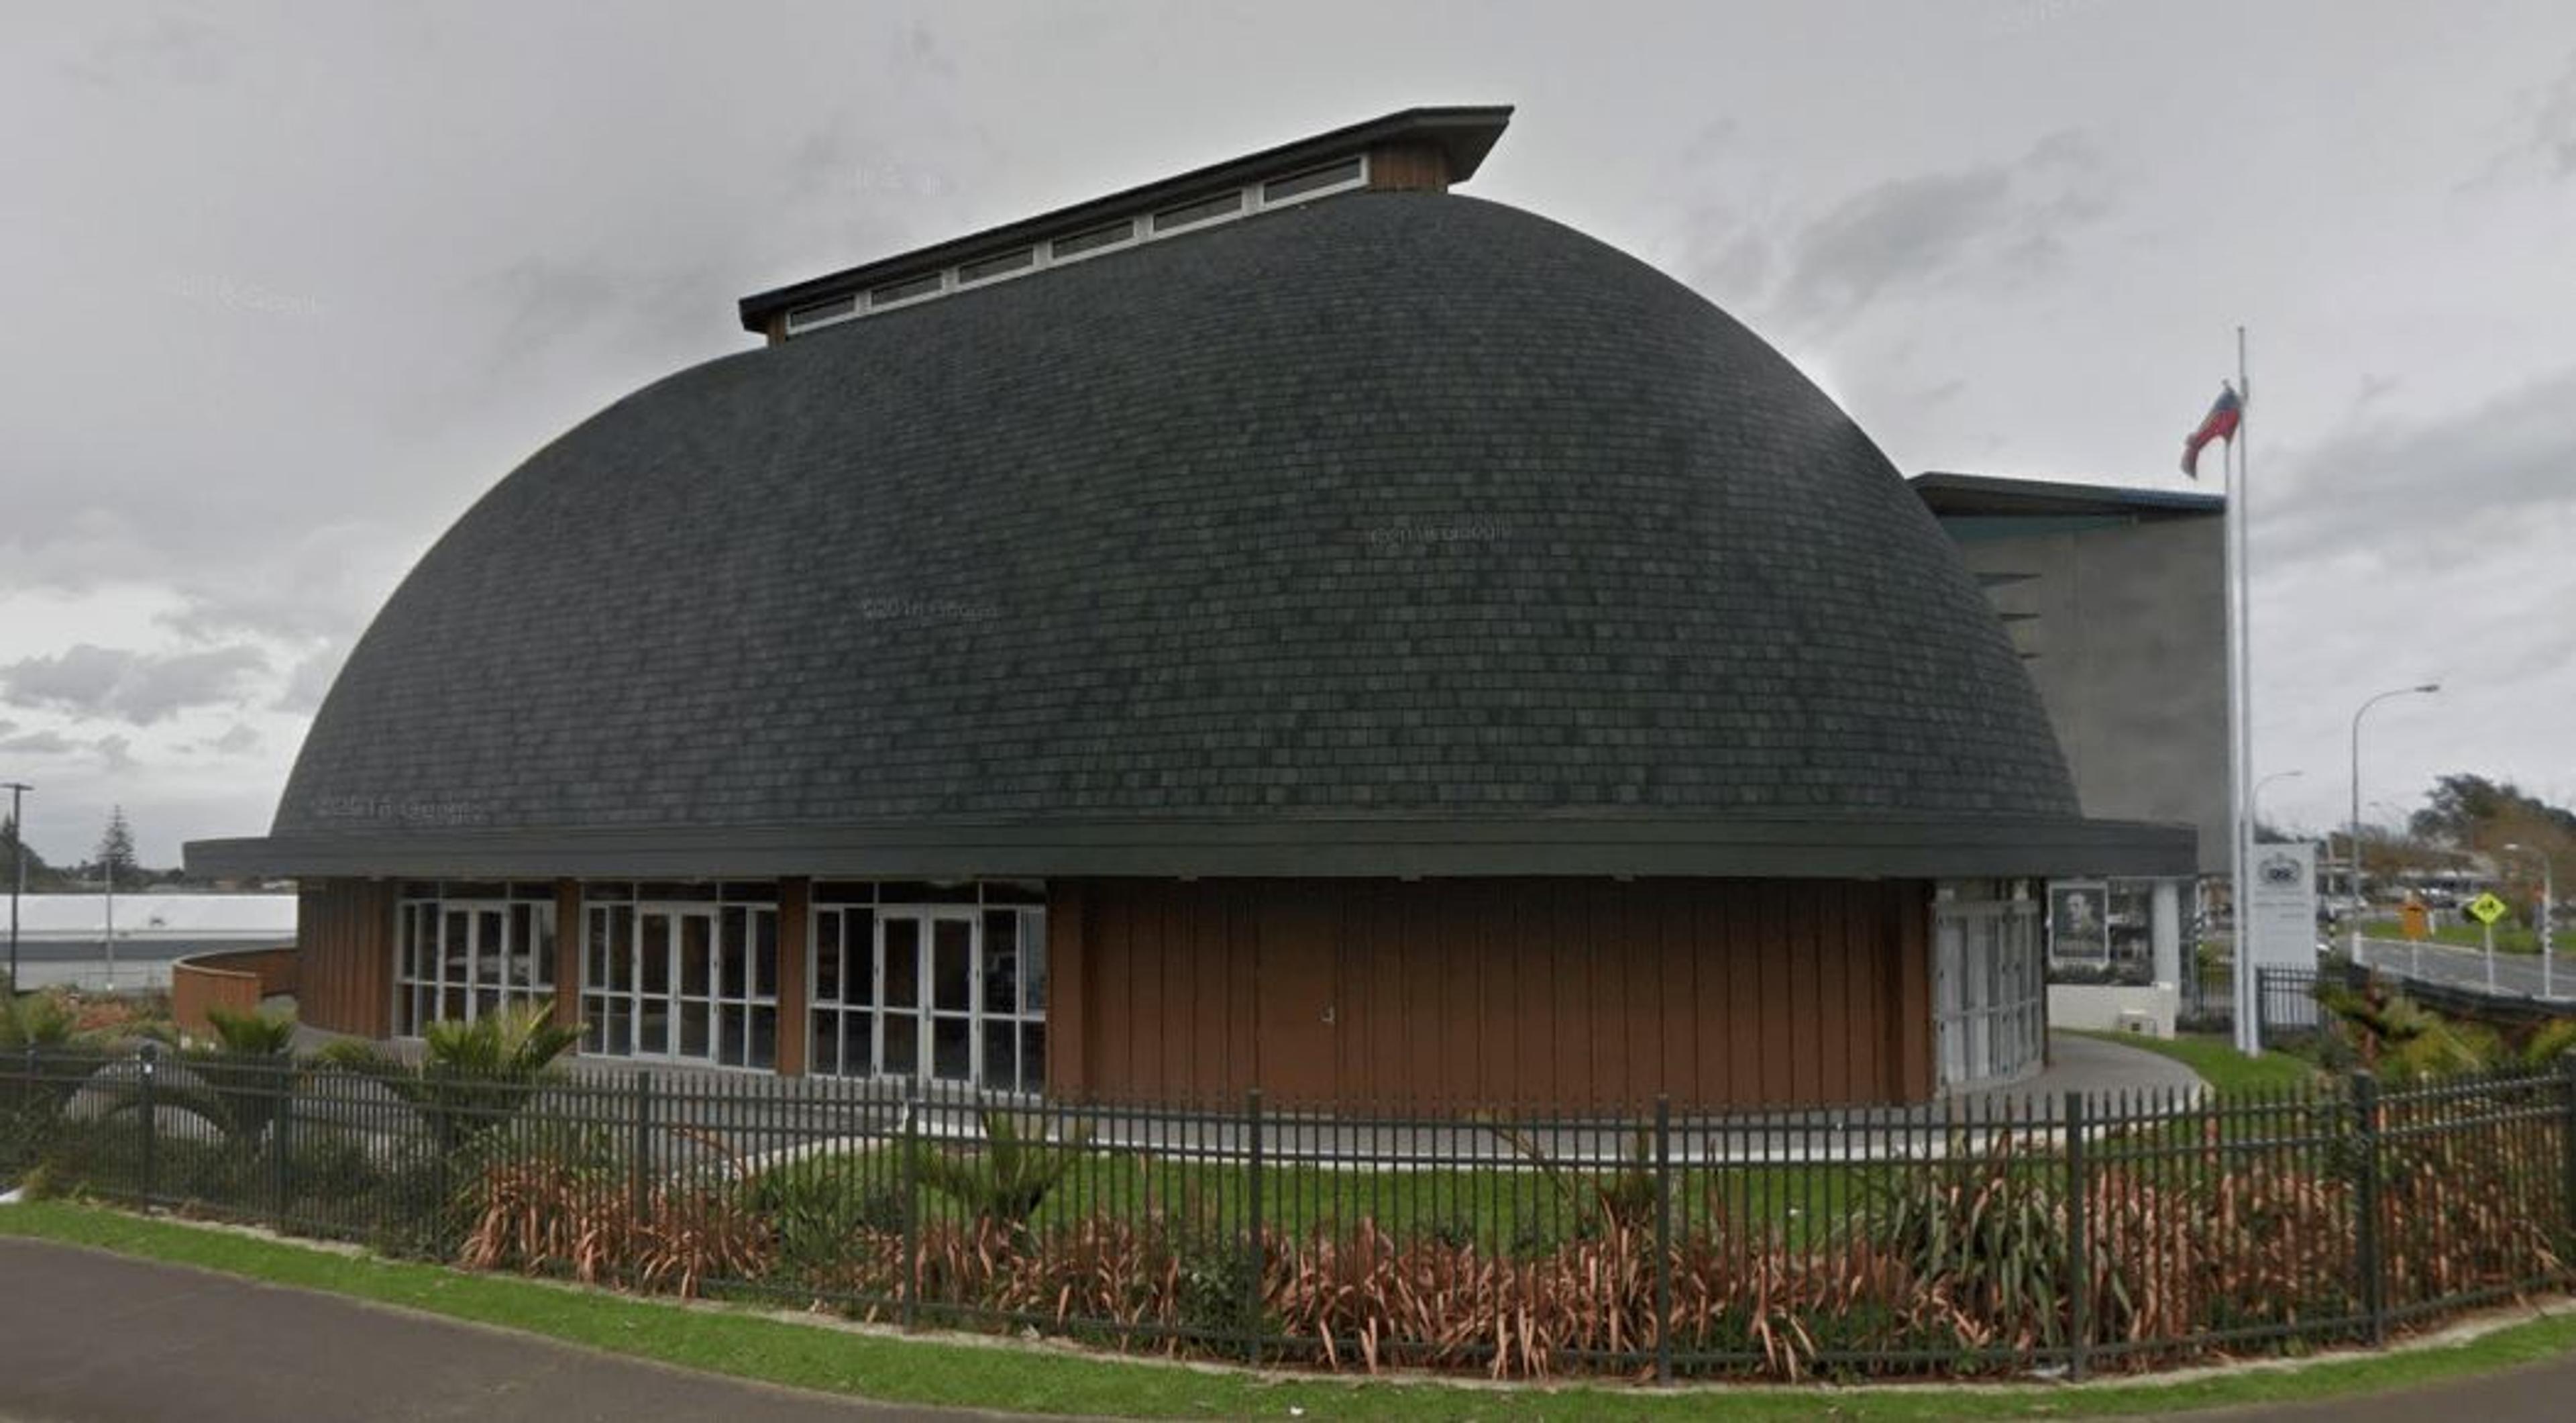 Survivors of abuse in state care will be able to give their testimony at hearings at the Fale o Samoa in Mangere in July. Photo: Google Maps